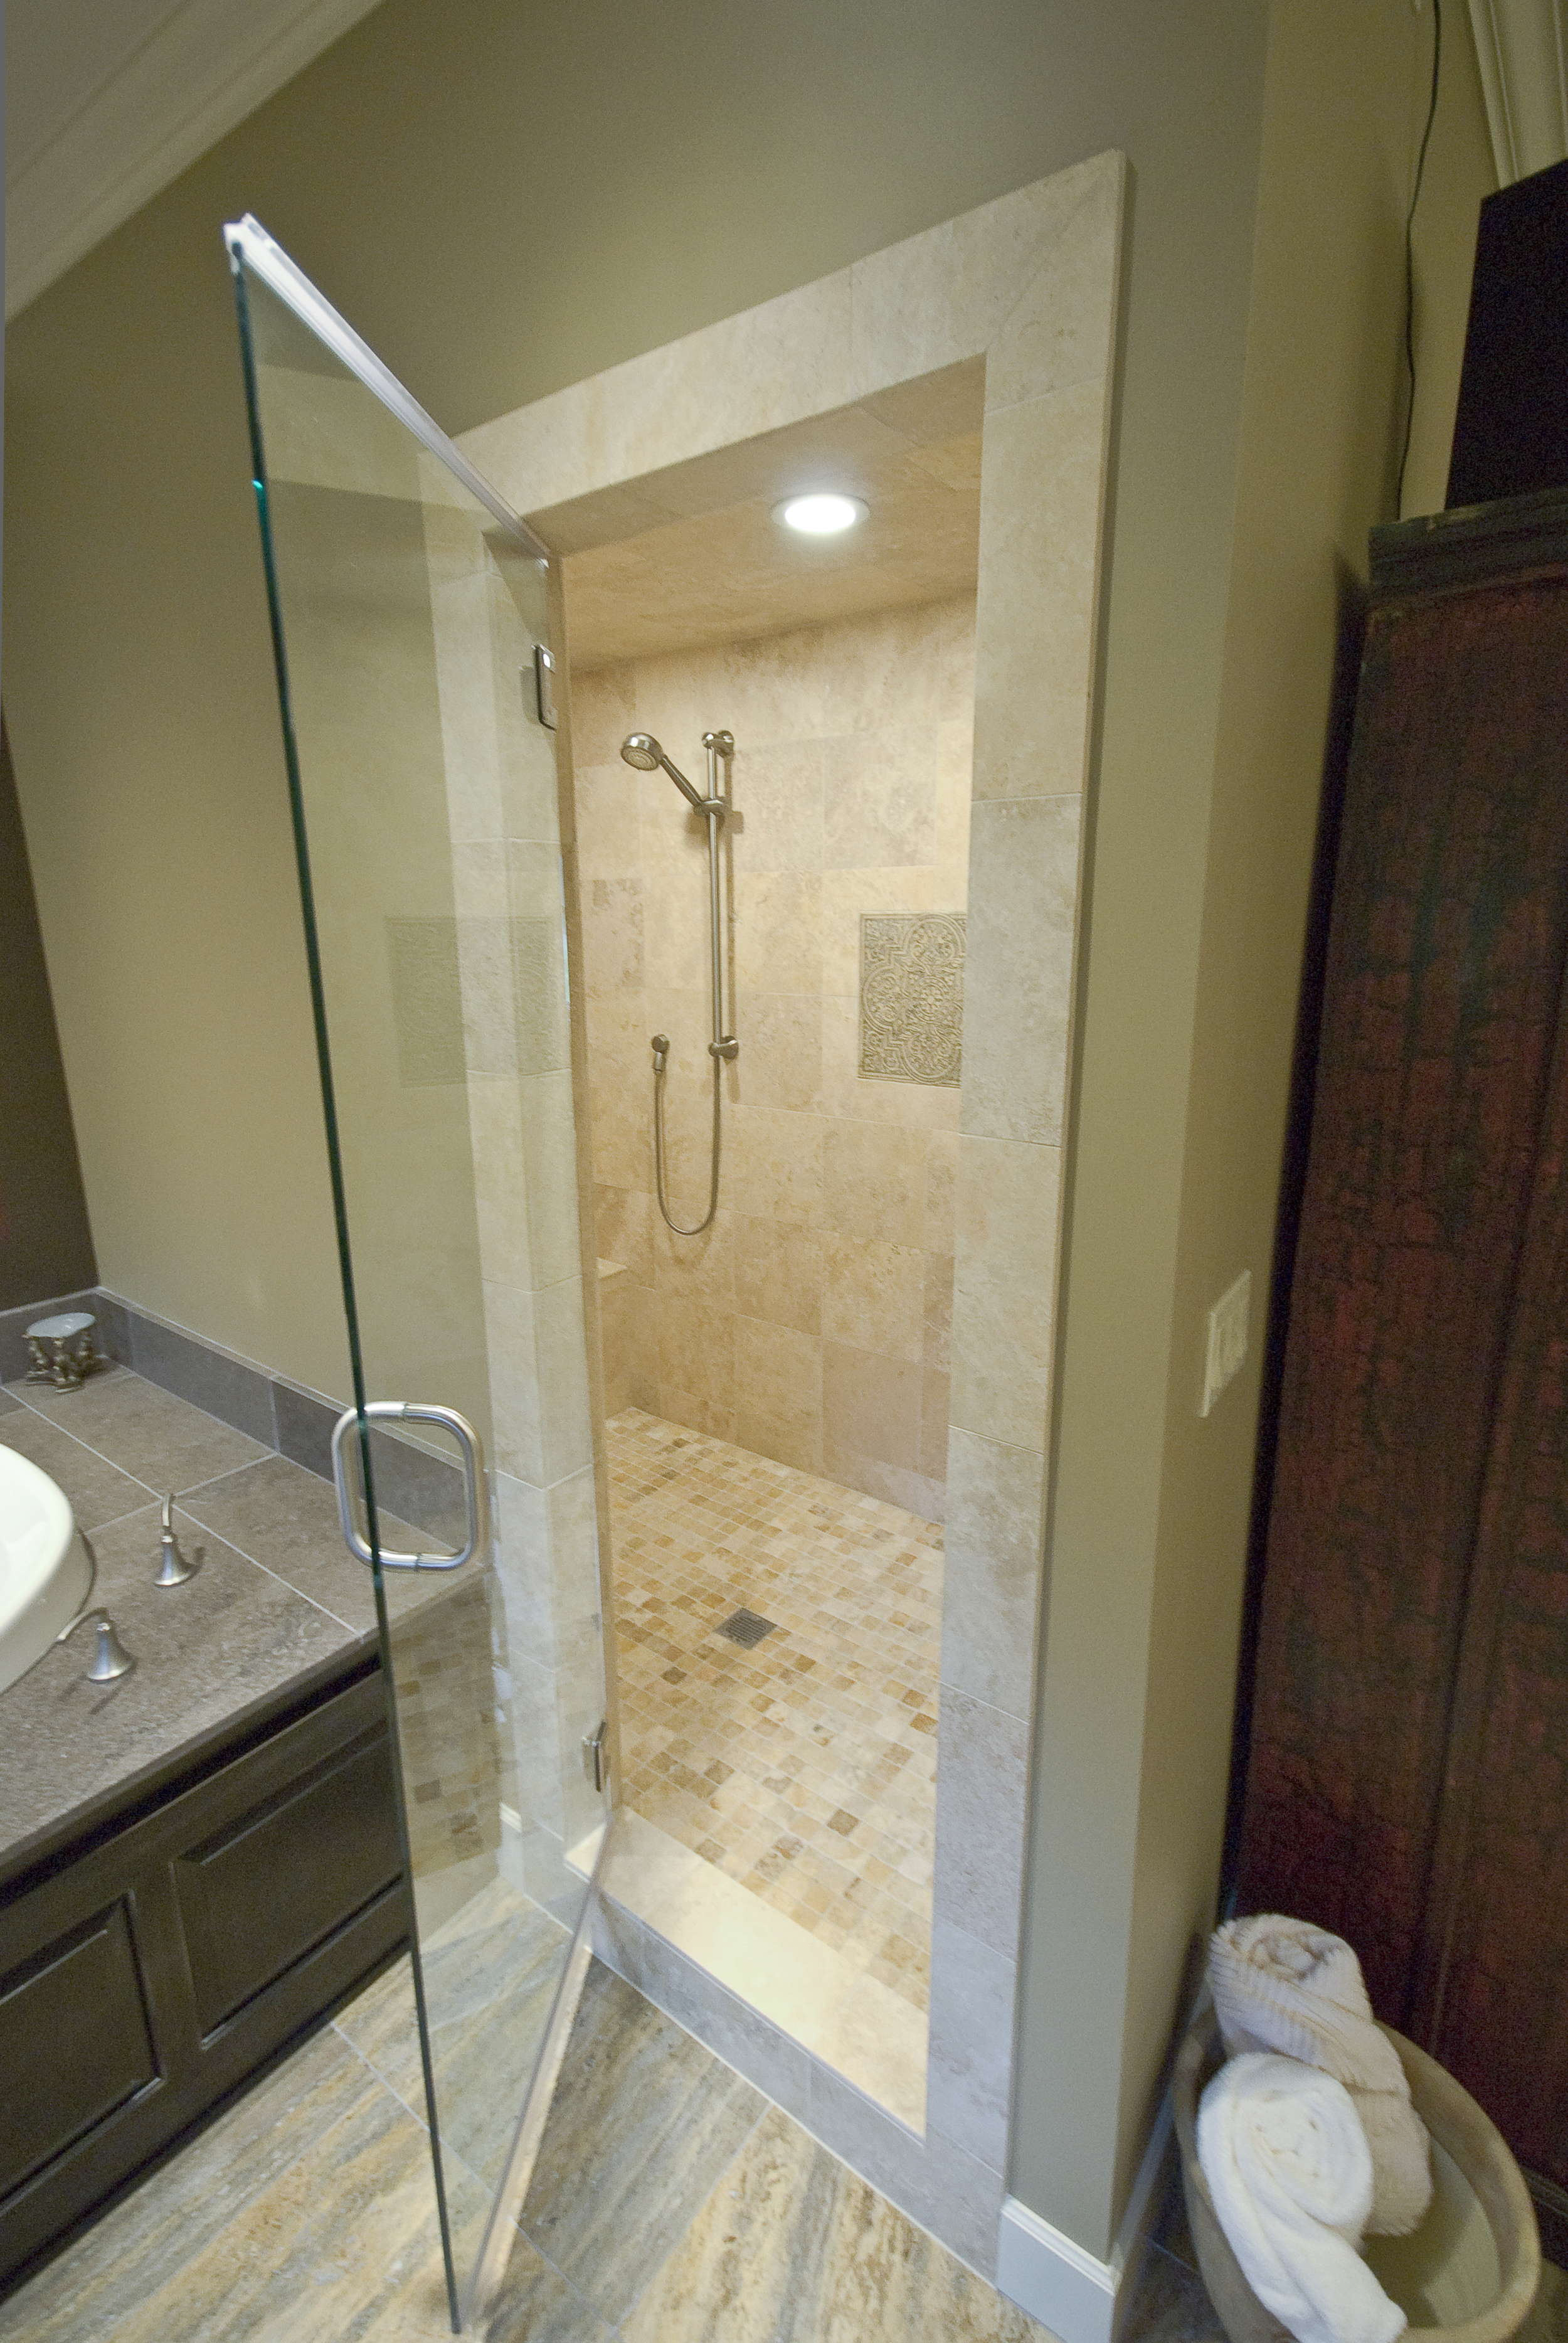 The steam shower was a must for him a sealed room with travertine tile floor to ceiling.  The tile is heated even in the shower and on the bench!